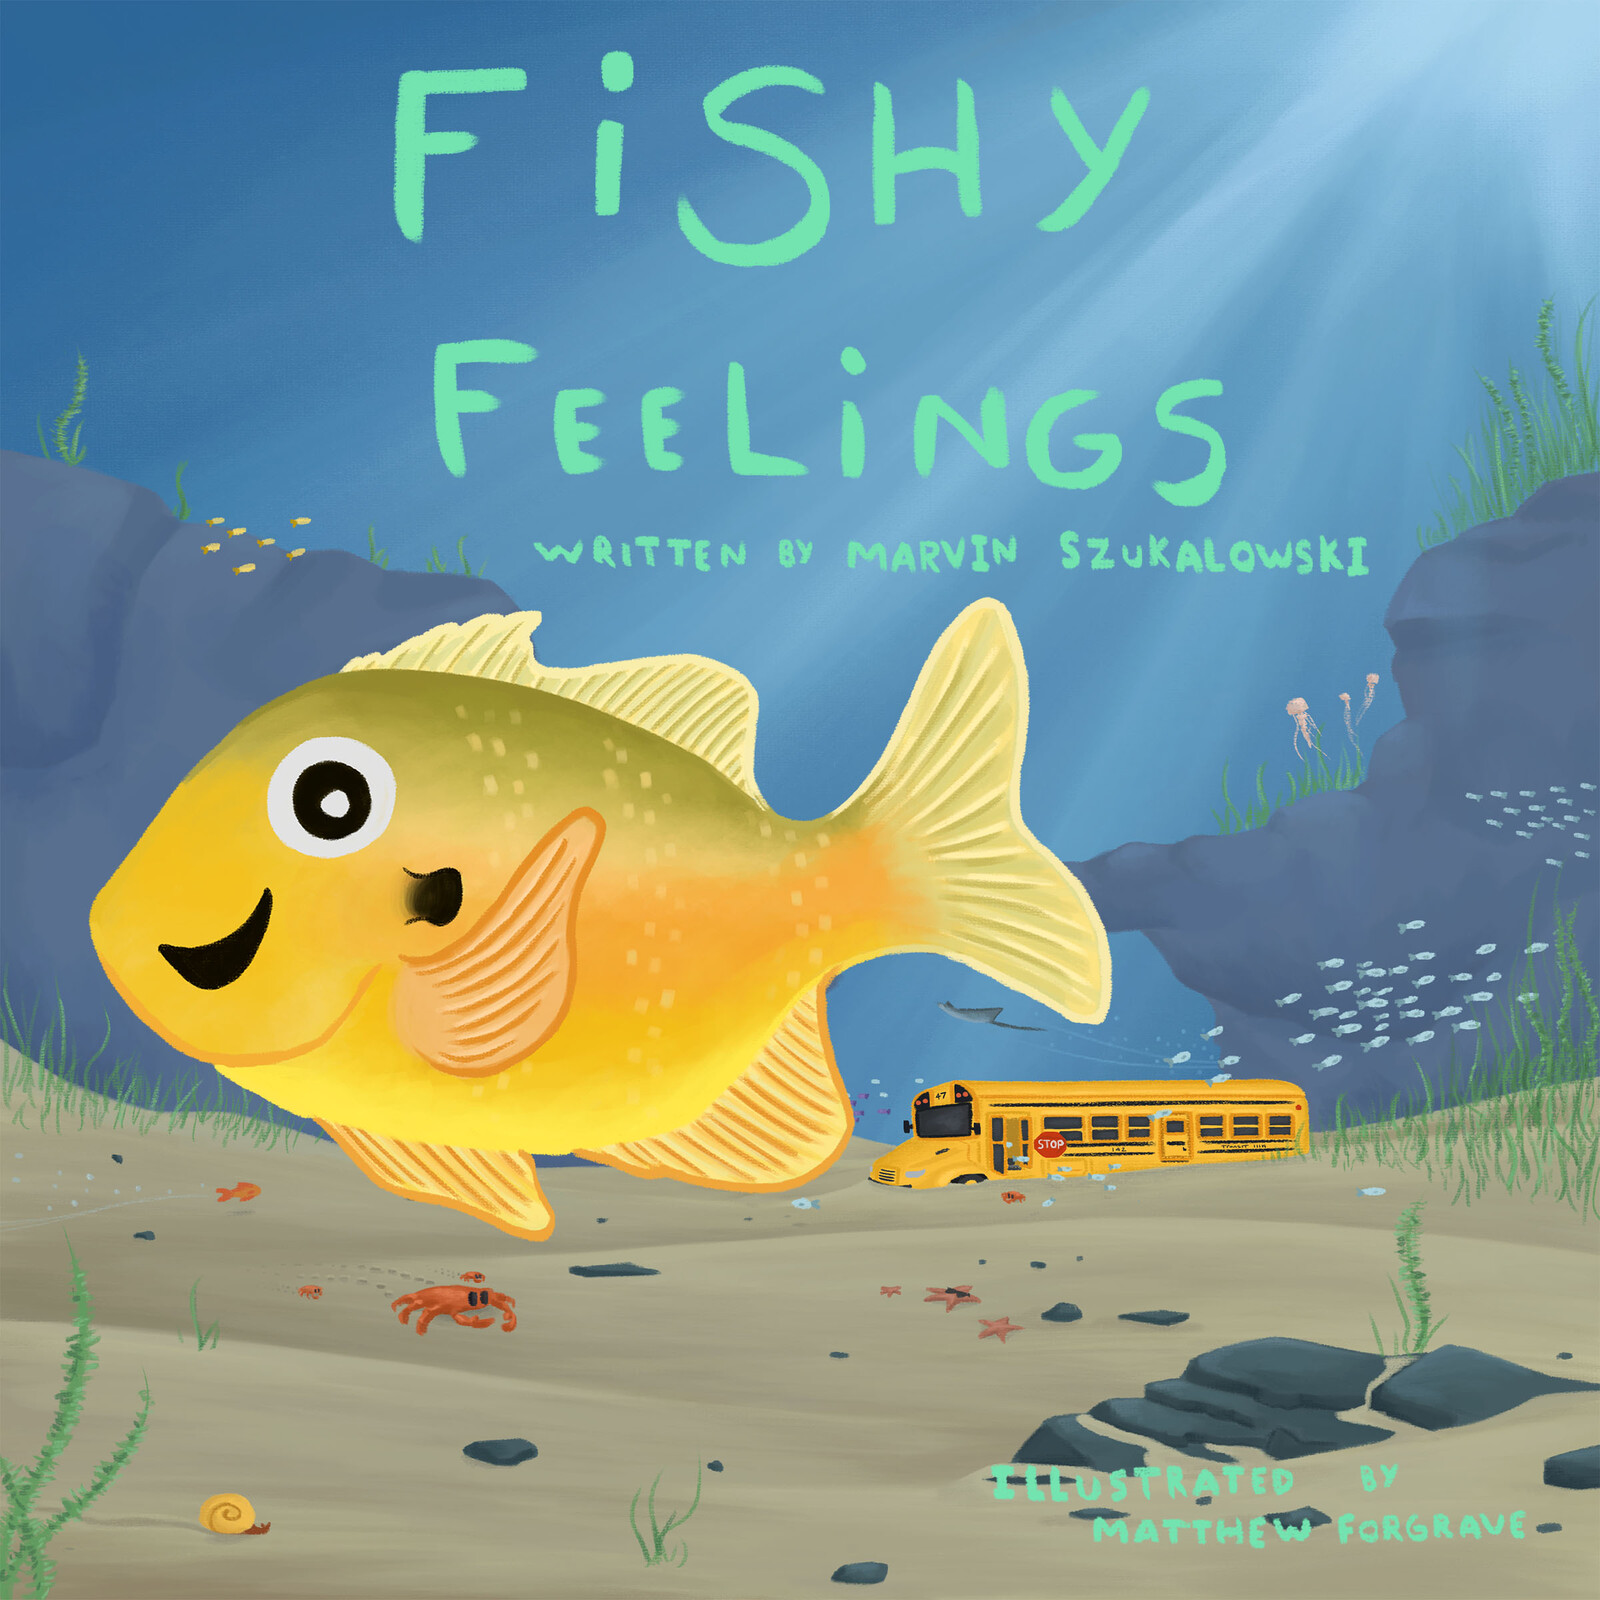 Cover for the children's book Fishy feelings